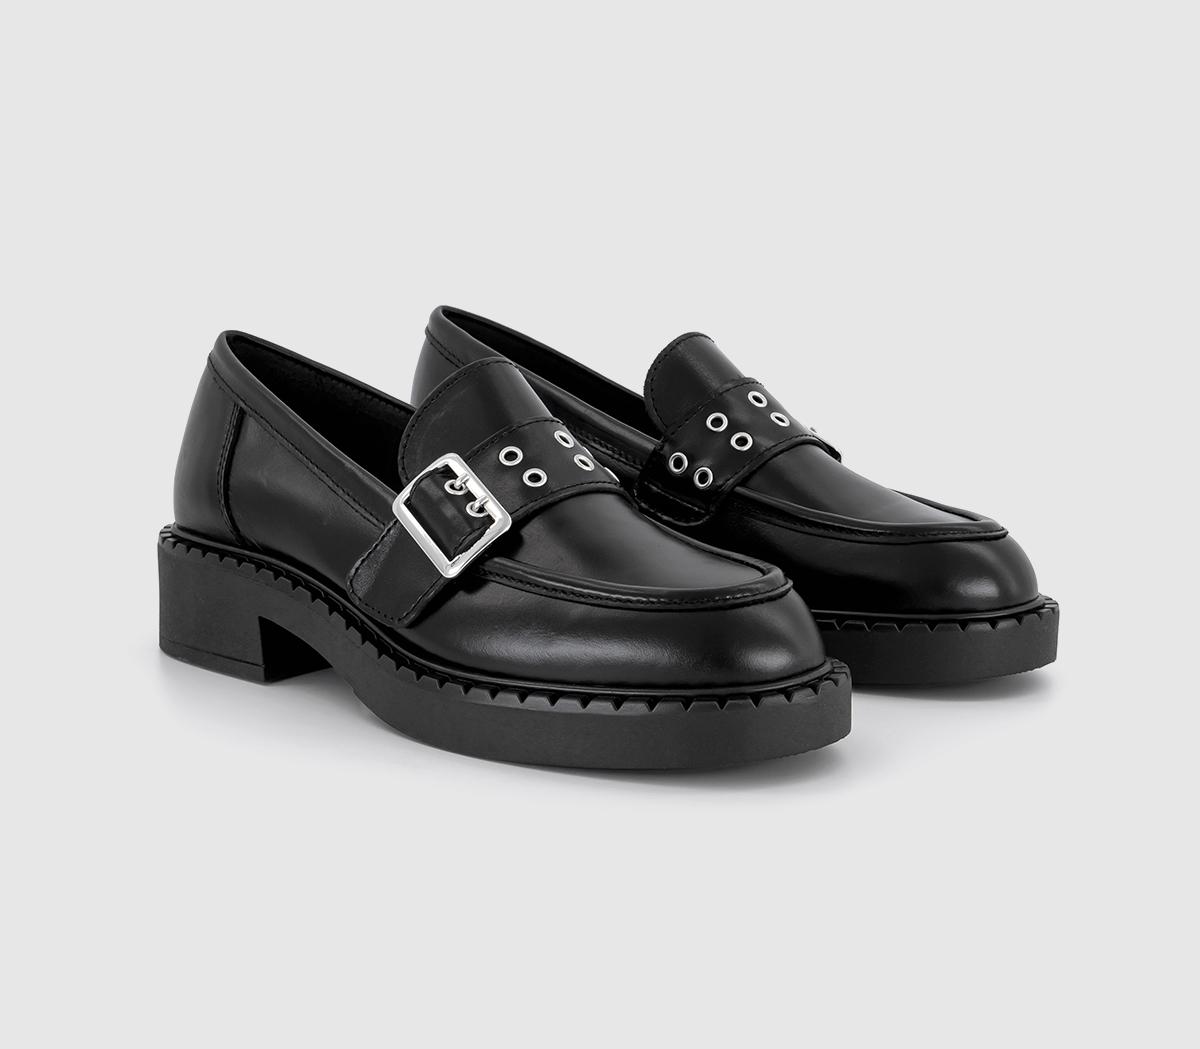 OFFICE Felix Chunky Hardware Loafers Black Leather - Flat Shoes for Women